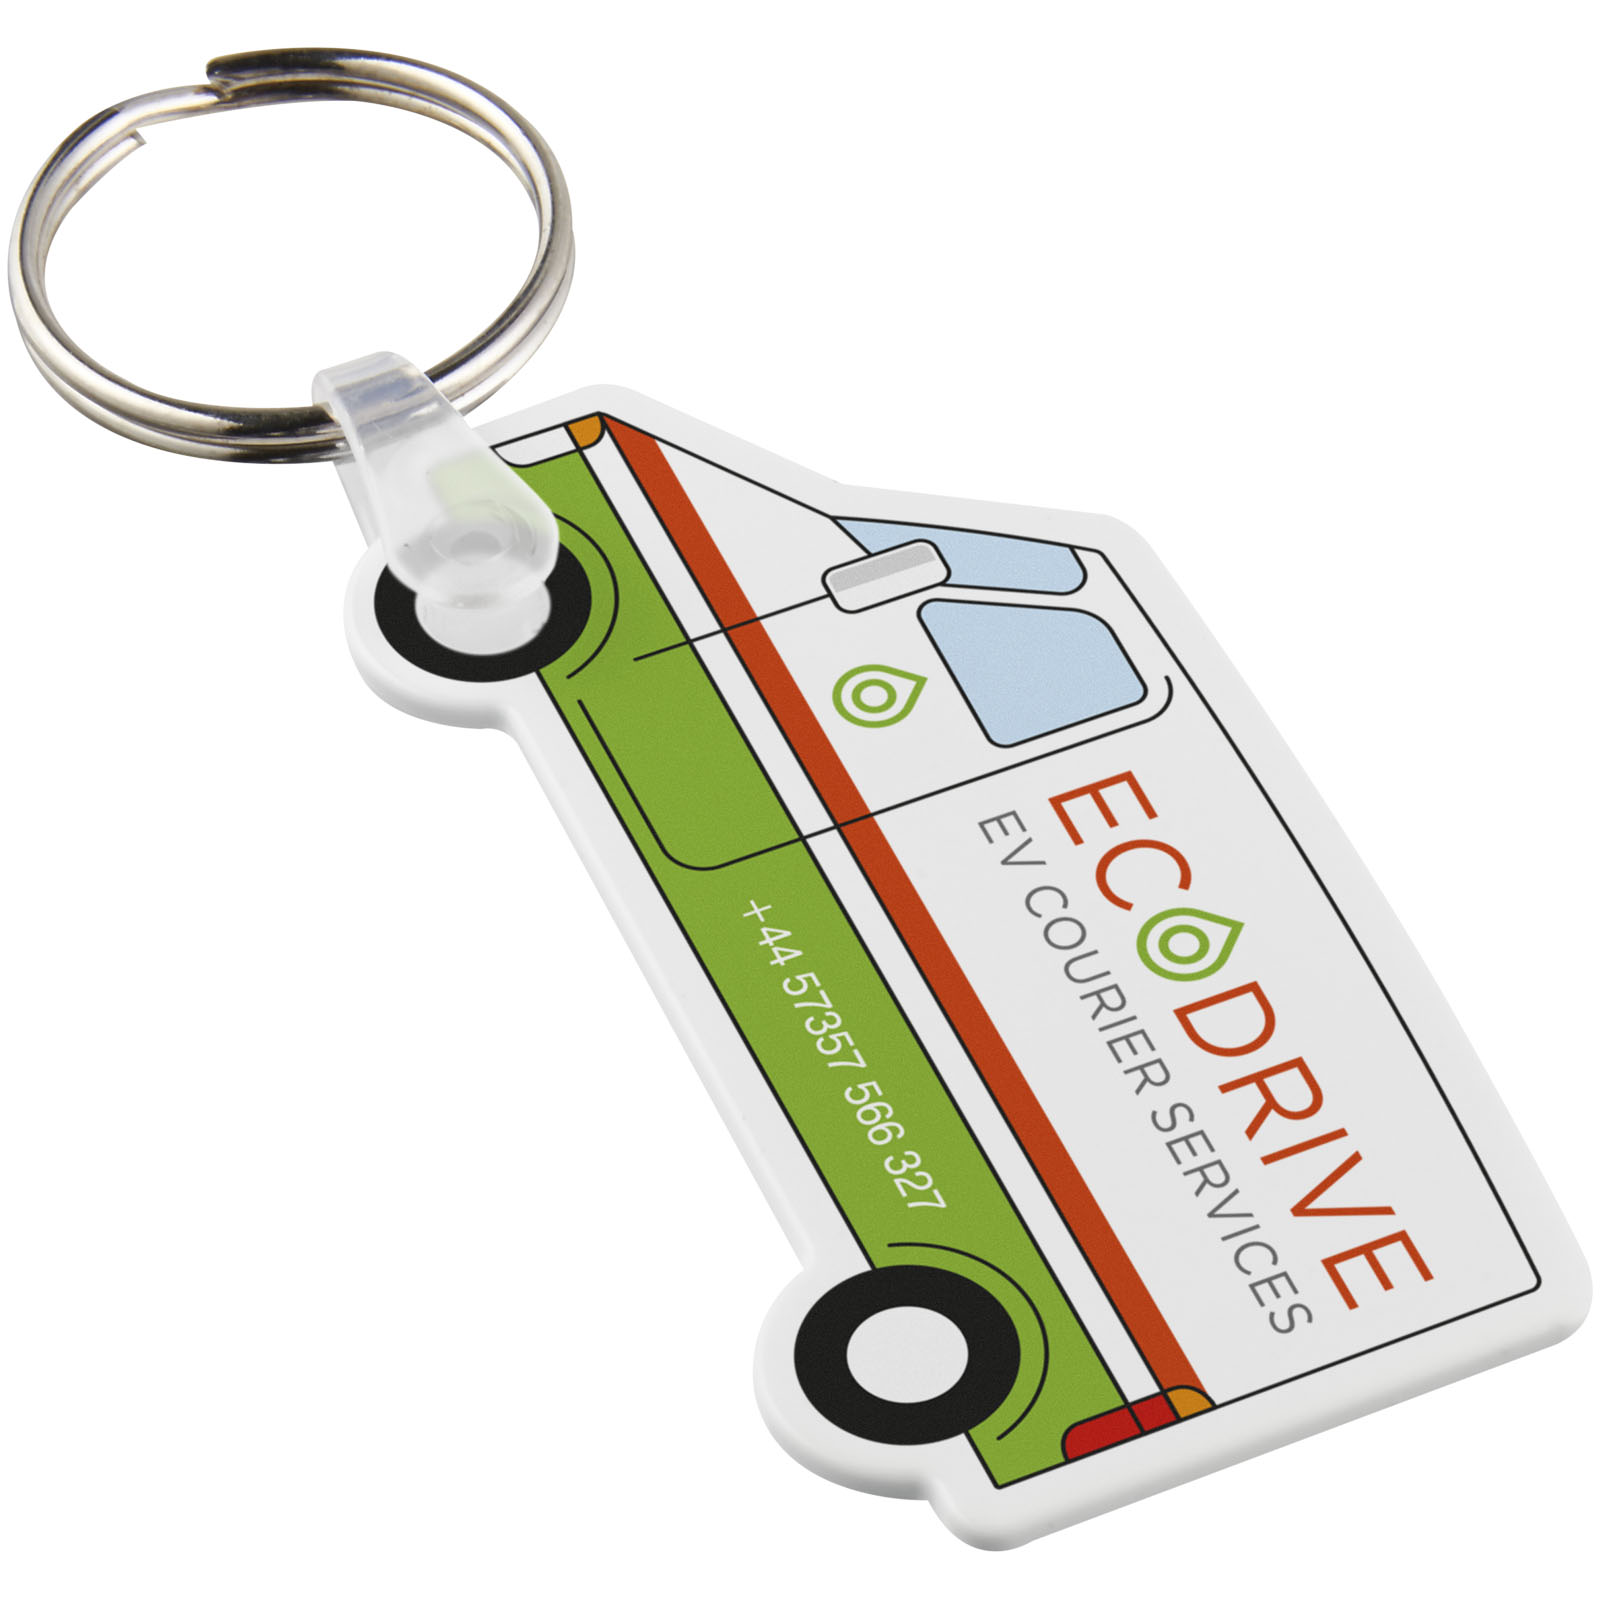 Advertising Keychains & Keyrings - Tait van-shaped recycled keychain - 0